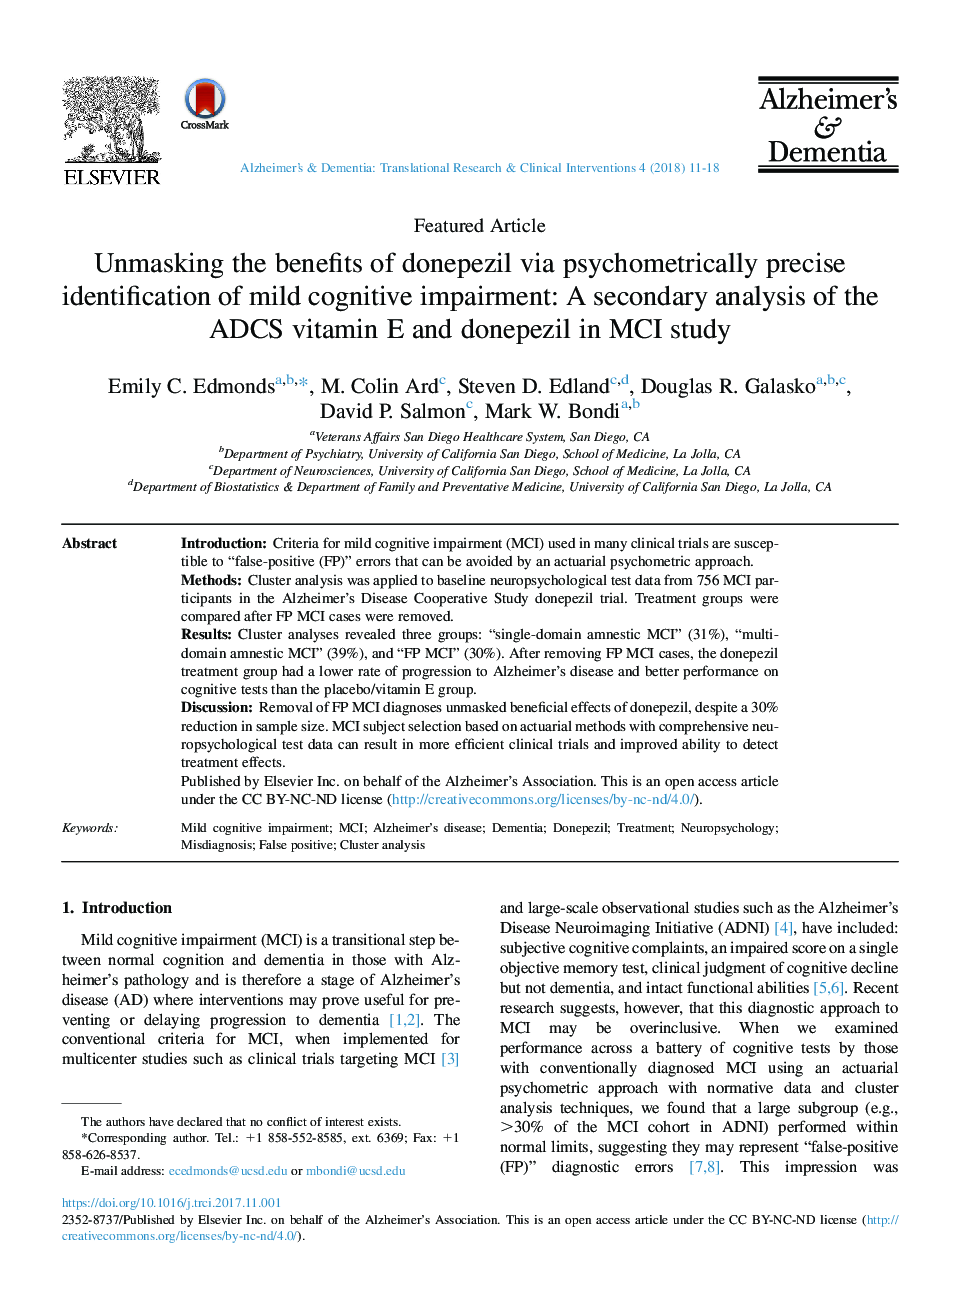 Unmasking the benefits of donepezil via psychometrically precise identification of mild cognitive impairment: A secondary analysis of the ADCS vitamin E and donepezil in MCI study